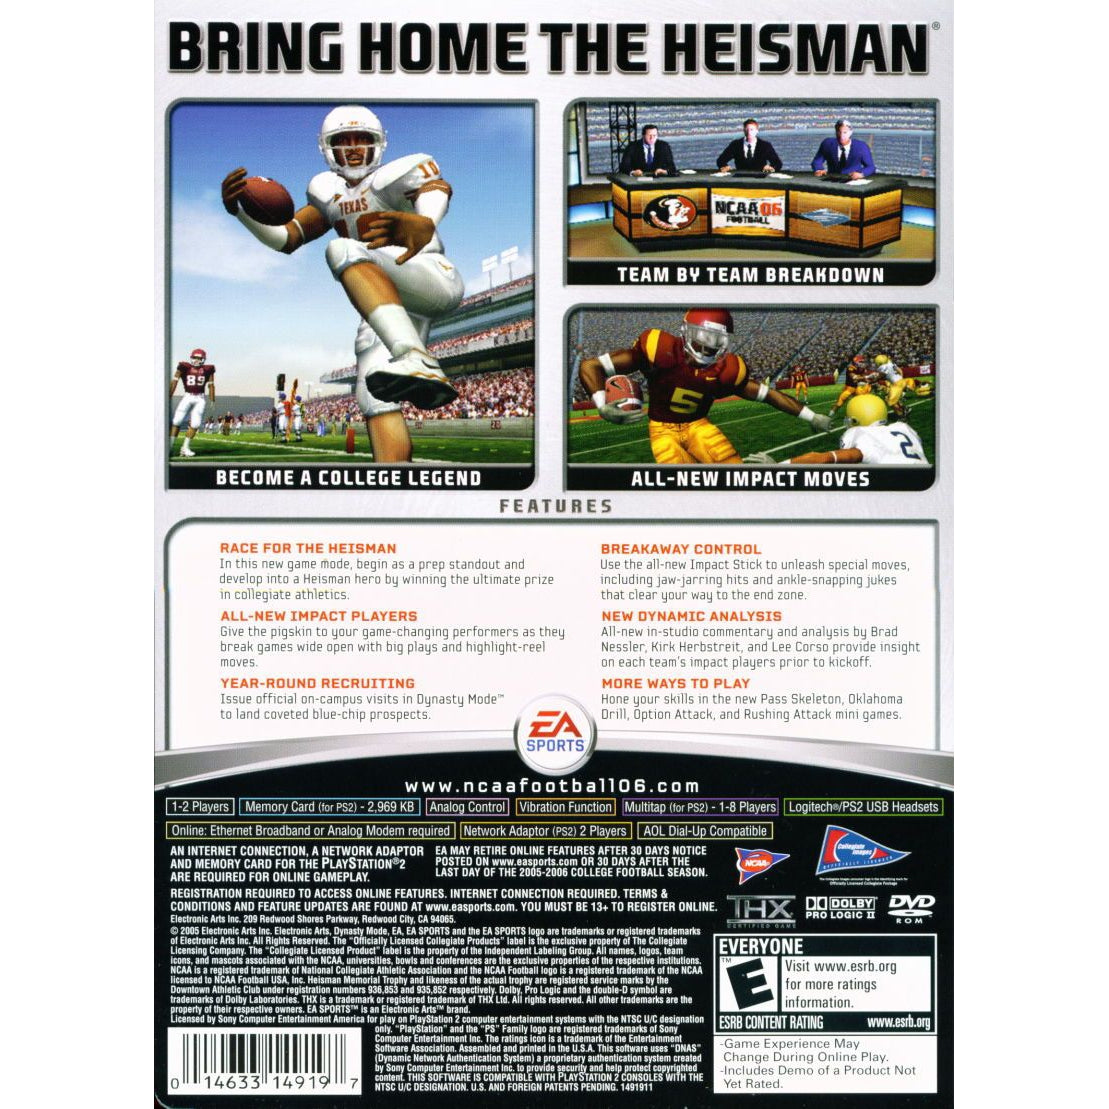 NCAA Football 06 - PlayStation 2 (PS2) Game Complete - YourGamingShop.com - Buy, Sell, Trade Video Games Online. 120 Day Warranty. Satisfaction Guaranteed.